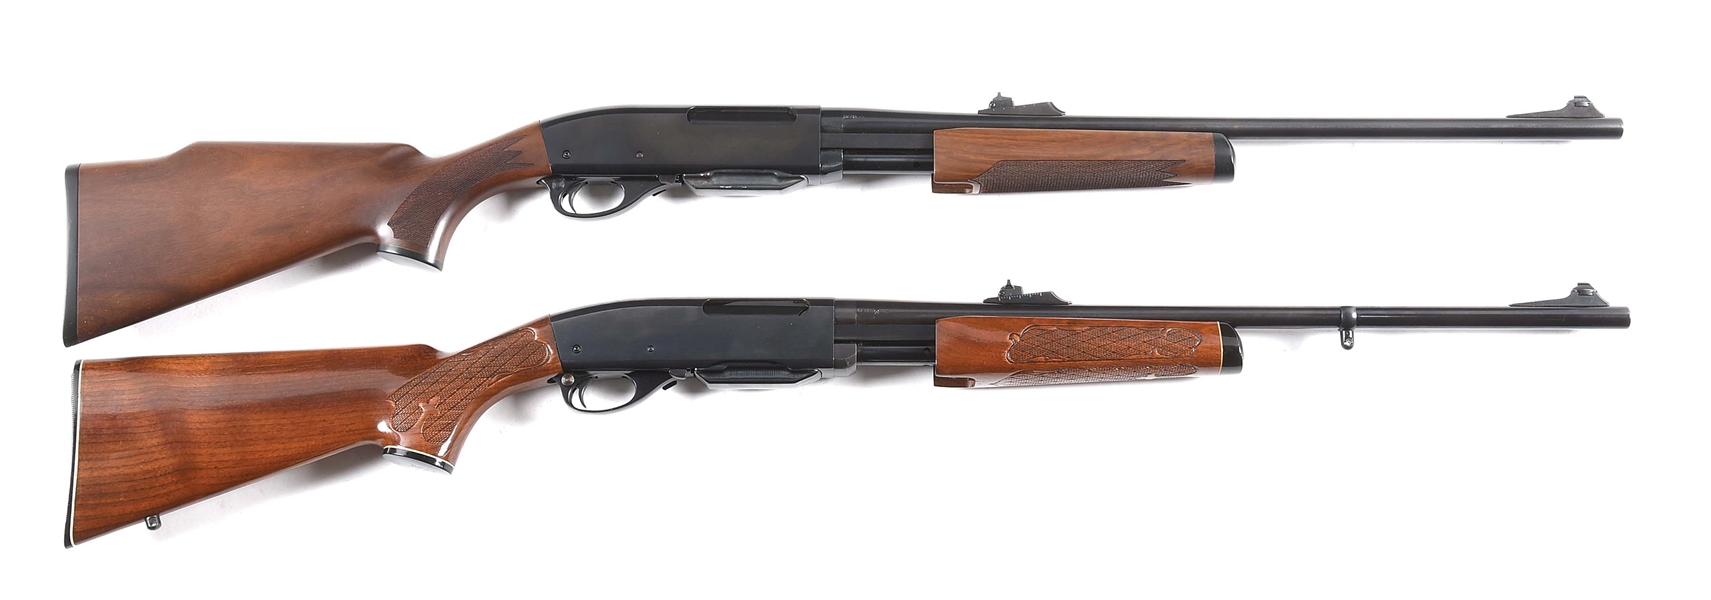 (M) LOT OF TWO REMINGTON SLIDE ACTION RIFLES: MODEL 760 AND MODEL 7600 IN SCARCE .257 ROBERTS